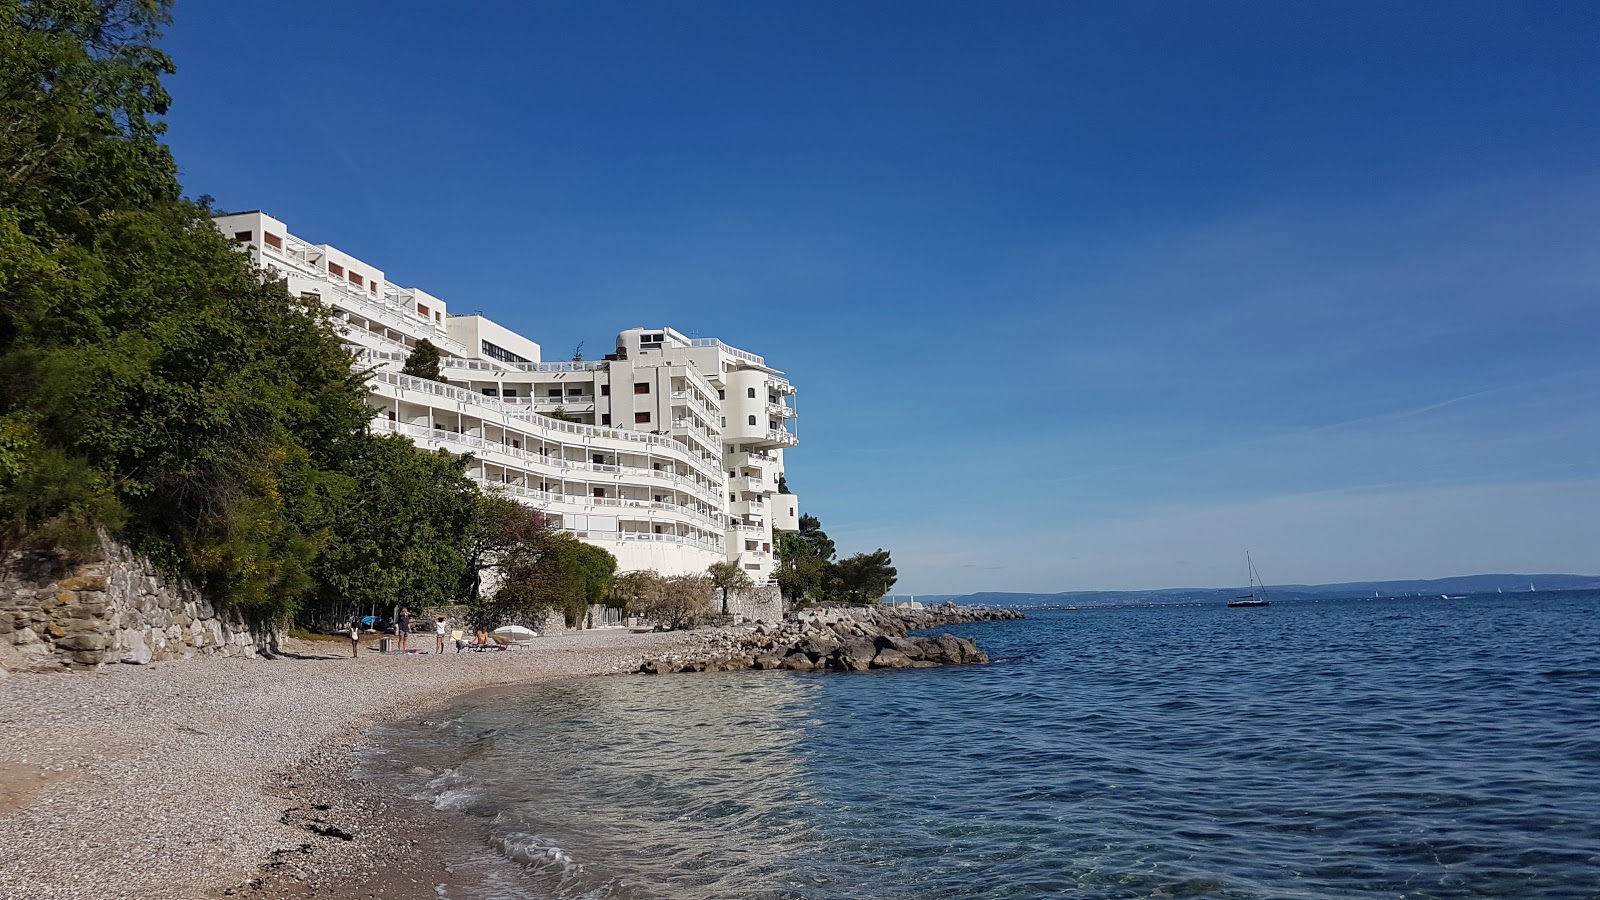 Photo of Spiaggia delle Ginestre with spacious shore